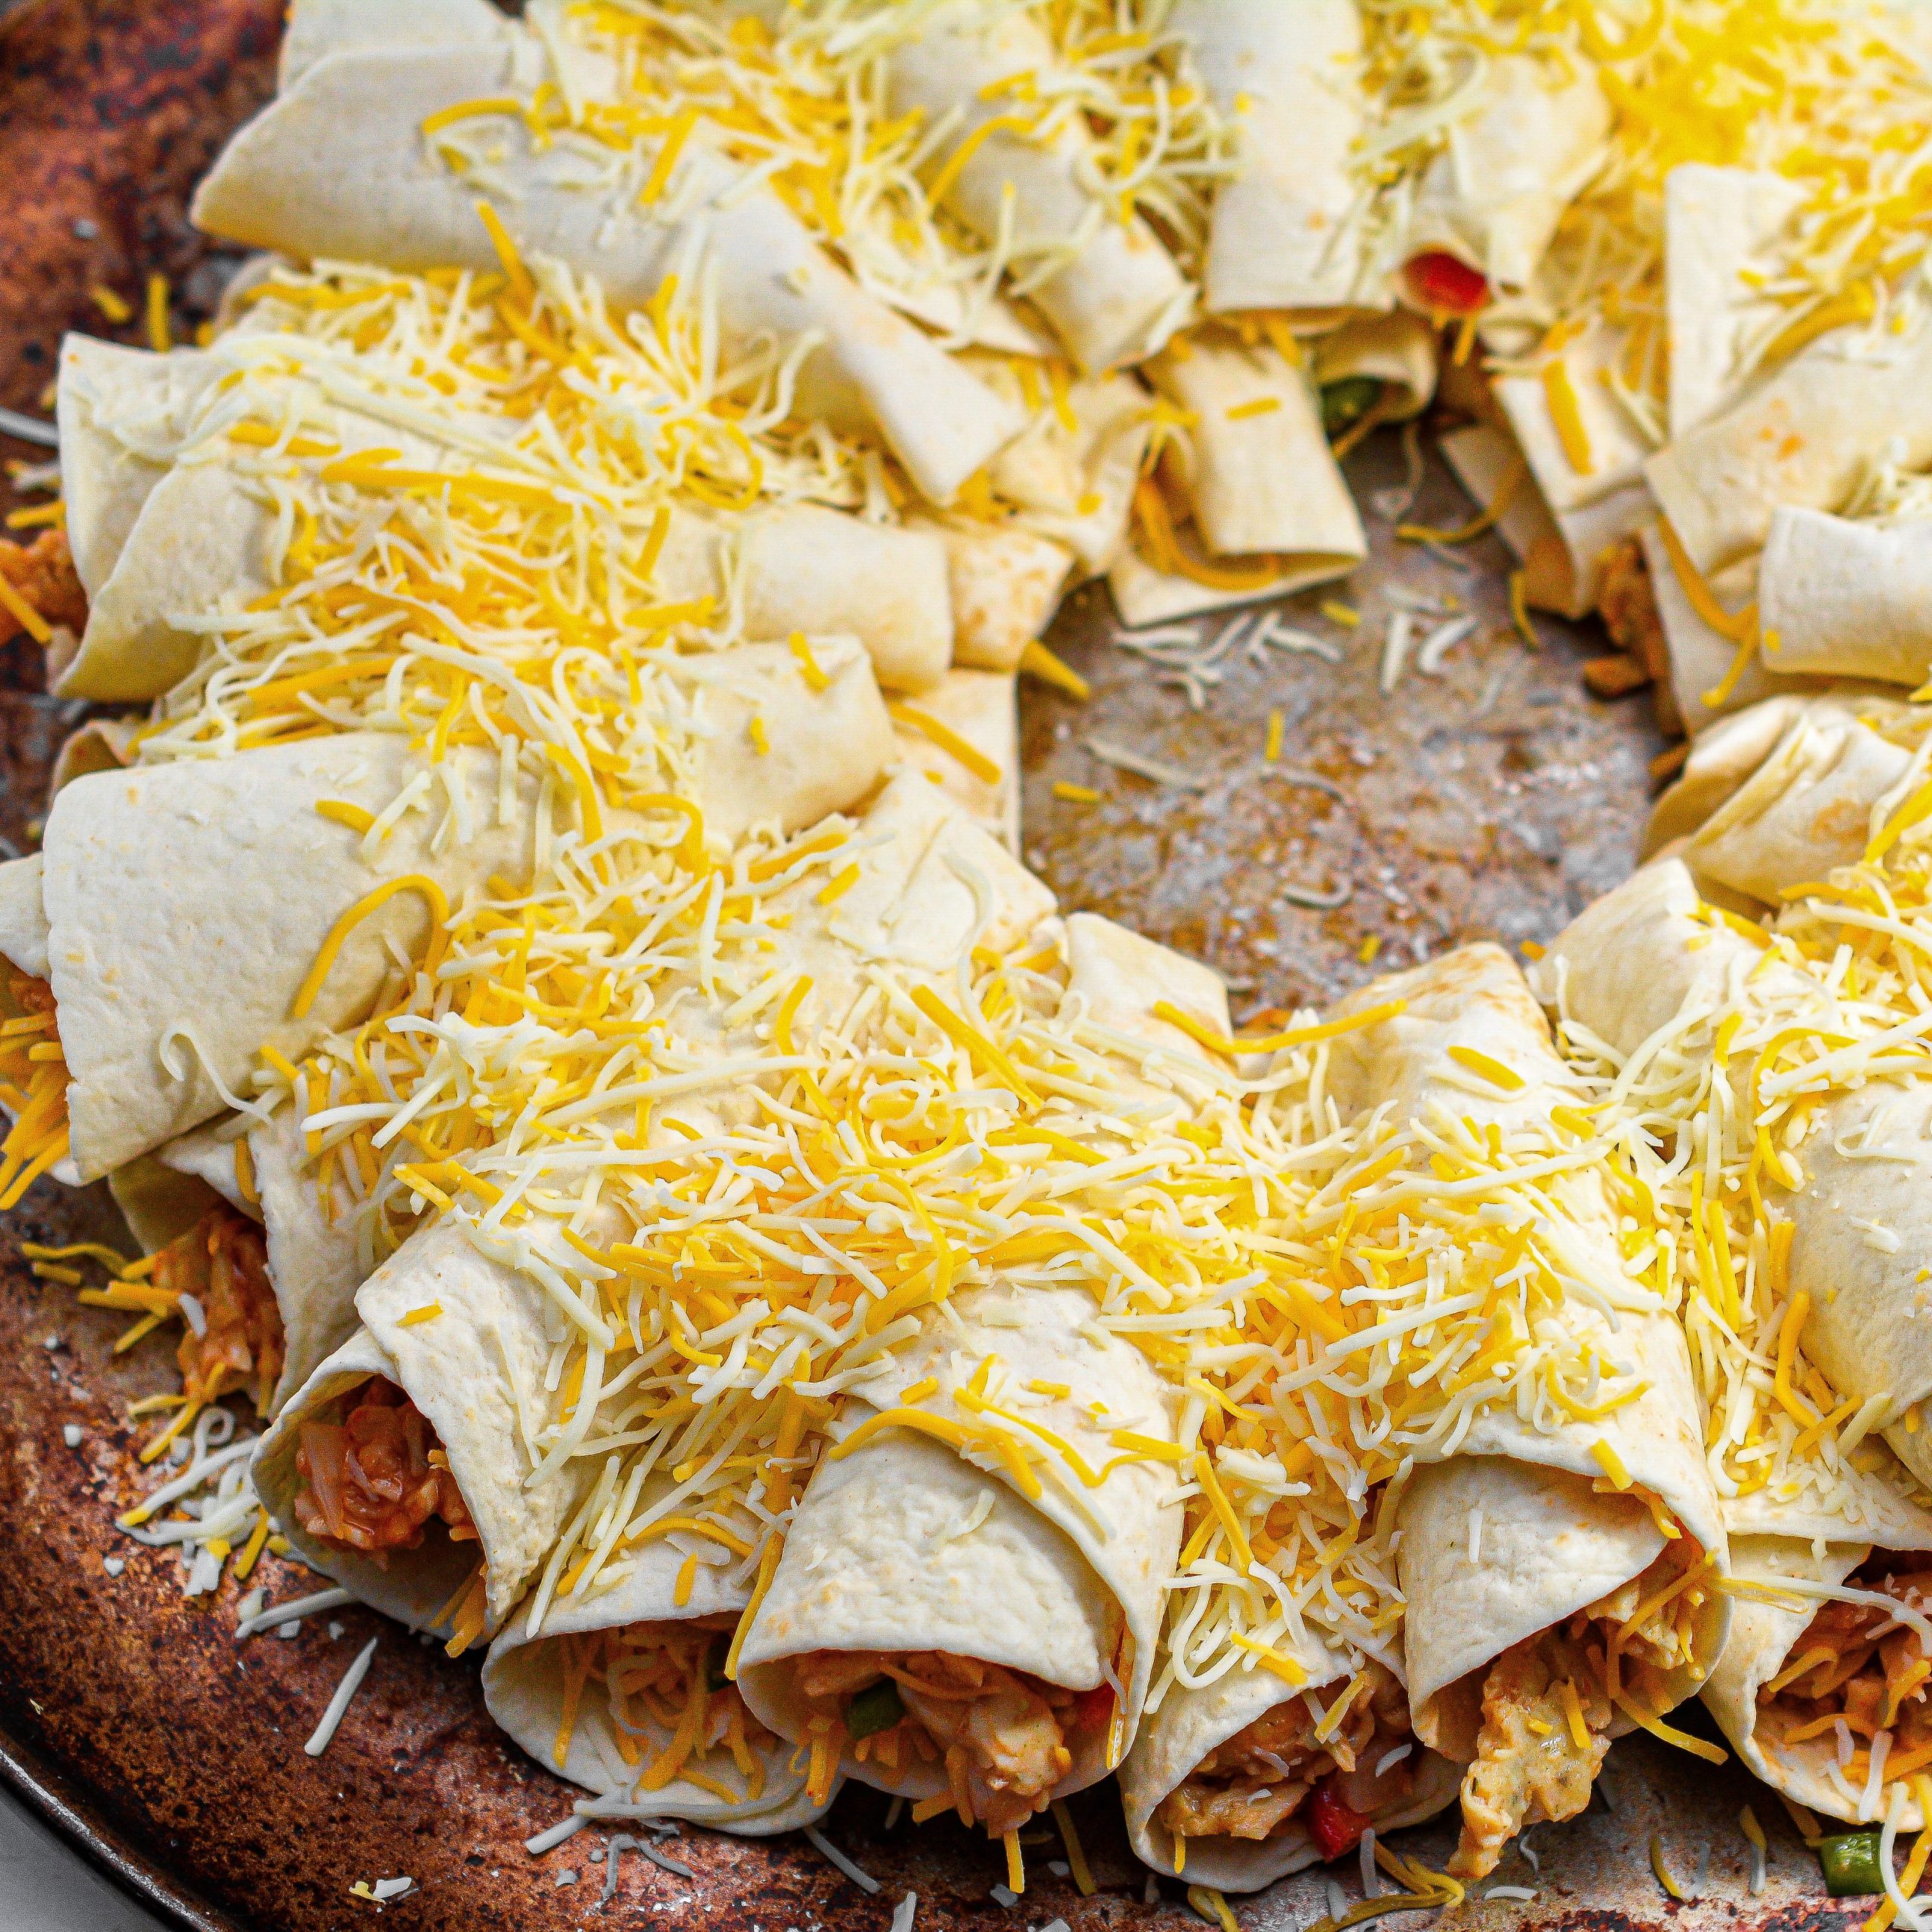 Once you have made one layer of tortilla cones, top them with the Mexican blend cheese.